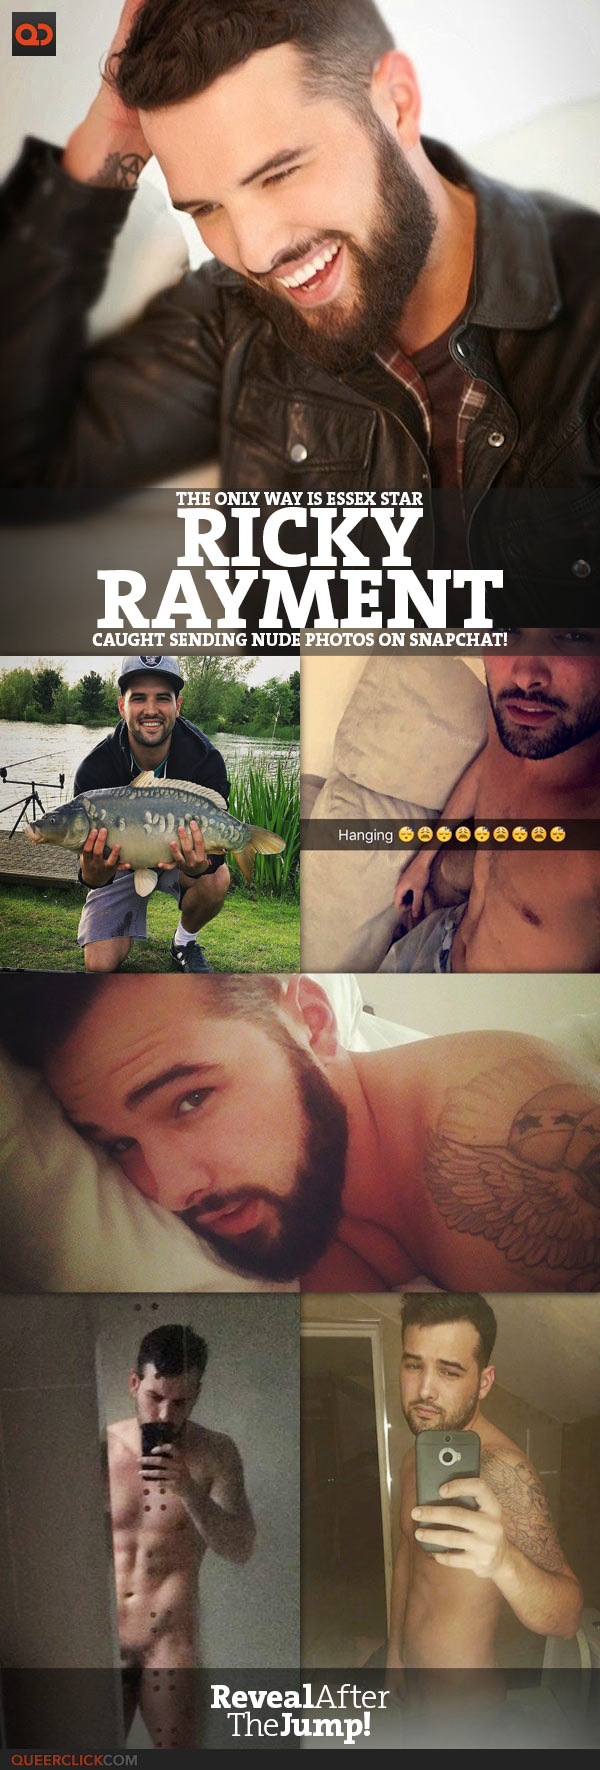 qc-ricky_rayment_towie_star_caught_naked_on_snapchat-teaser